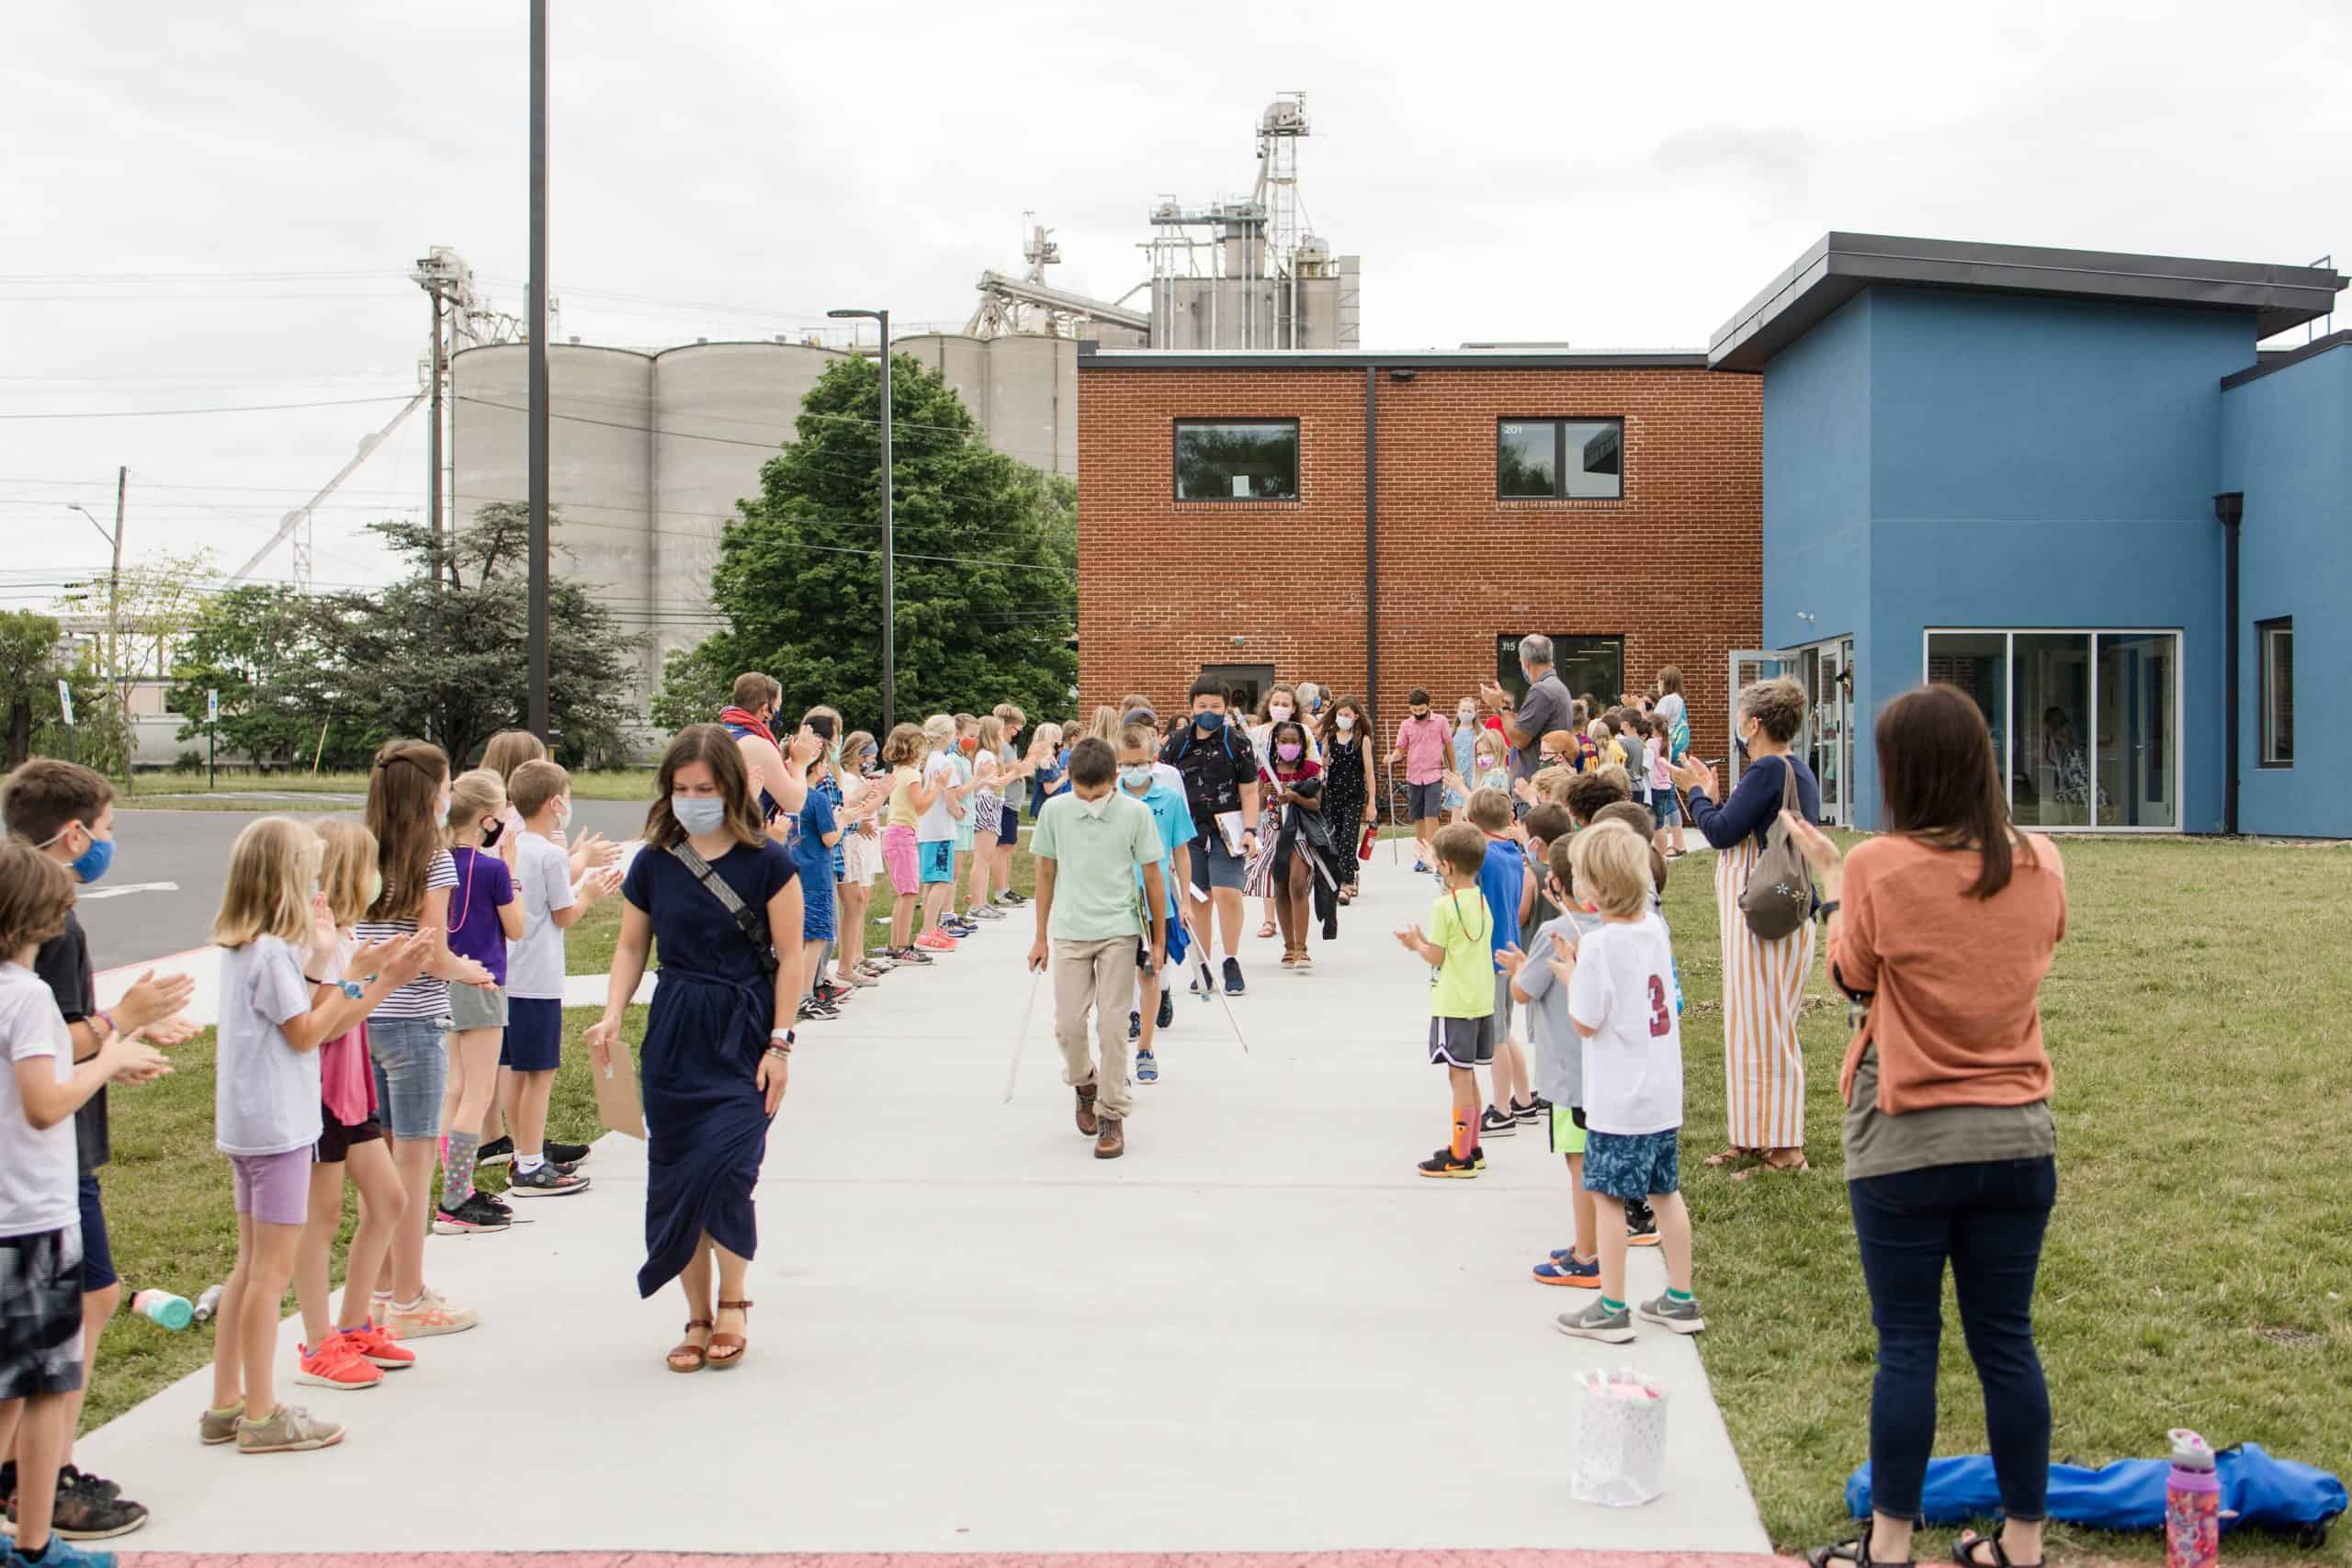 Grades K-4 line the sidewalk to cheer on 5th grade student graduates. Photo courtesy of Christy McKee